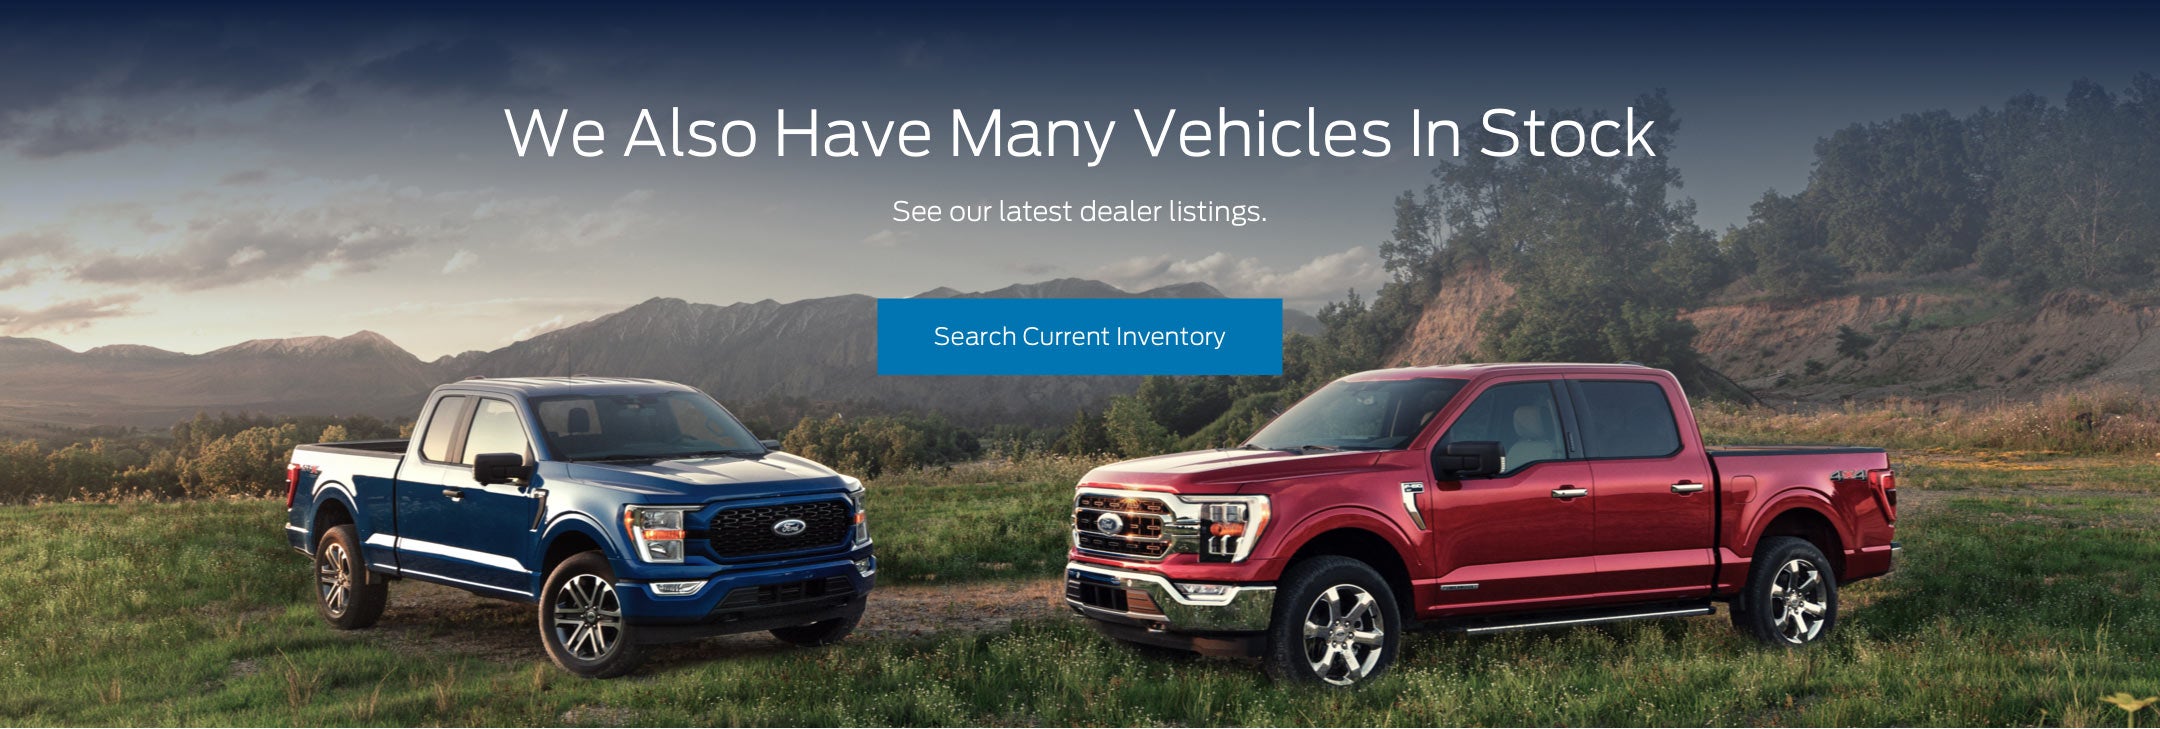 Ford vehicles in stock | Moon Township Ford in Moon Township PA